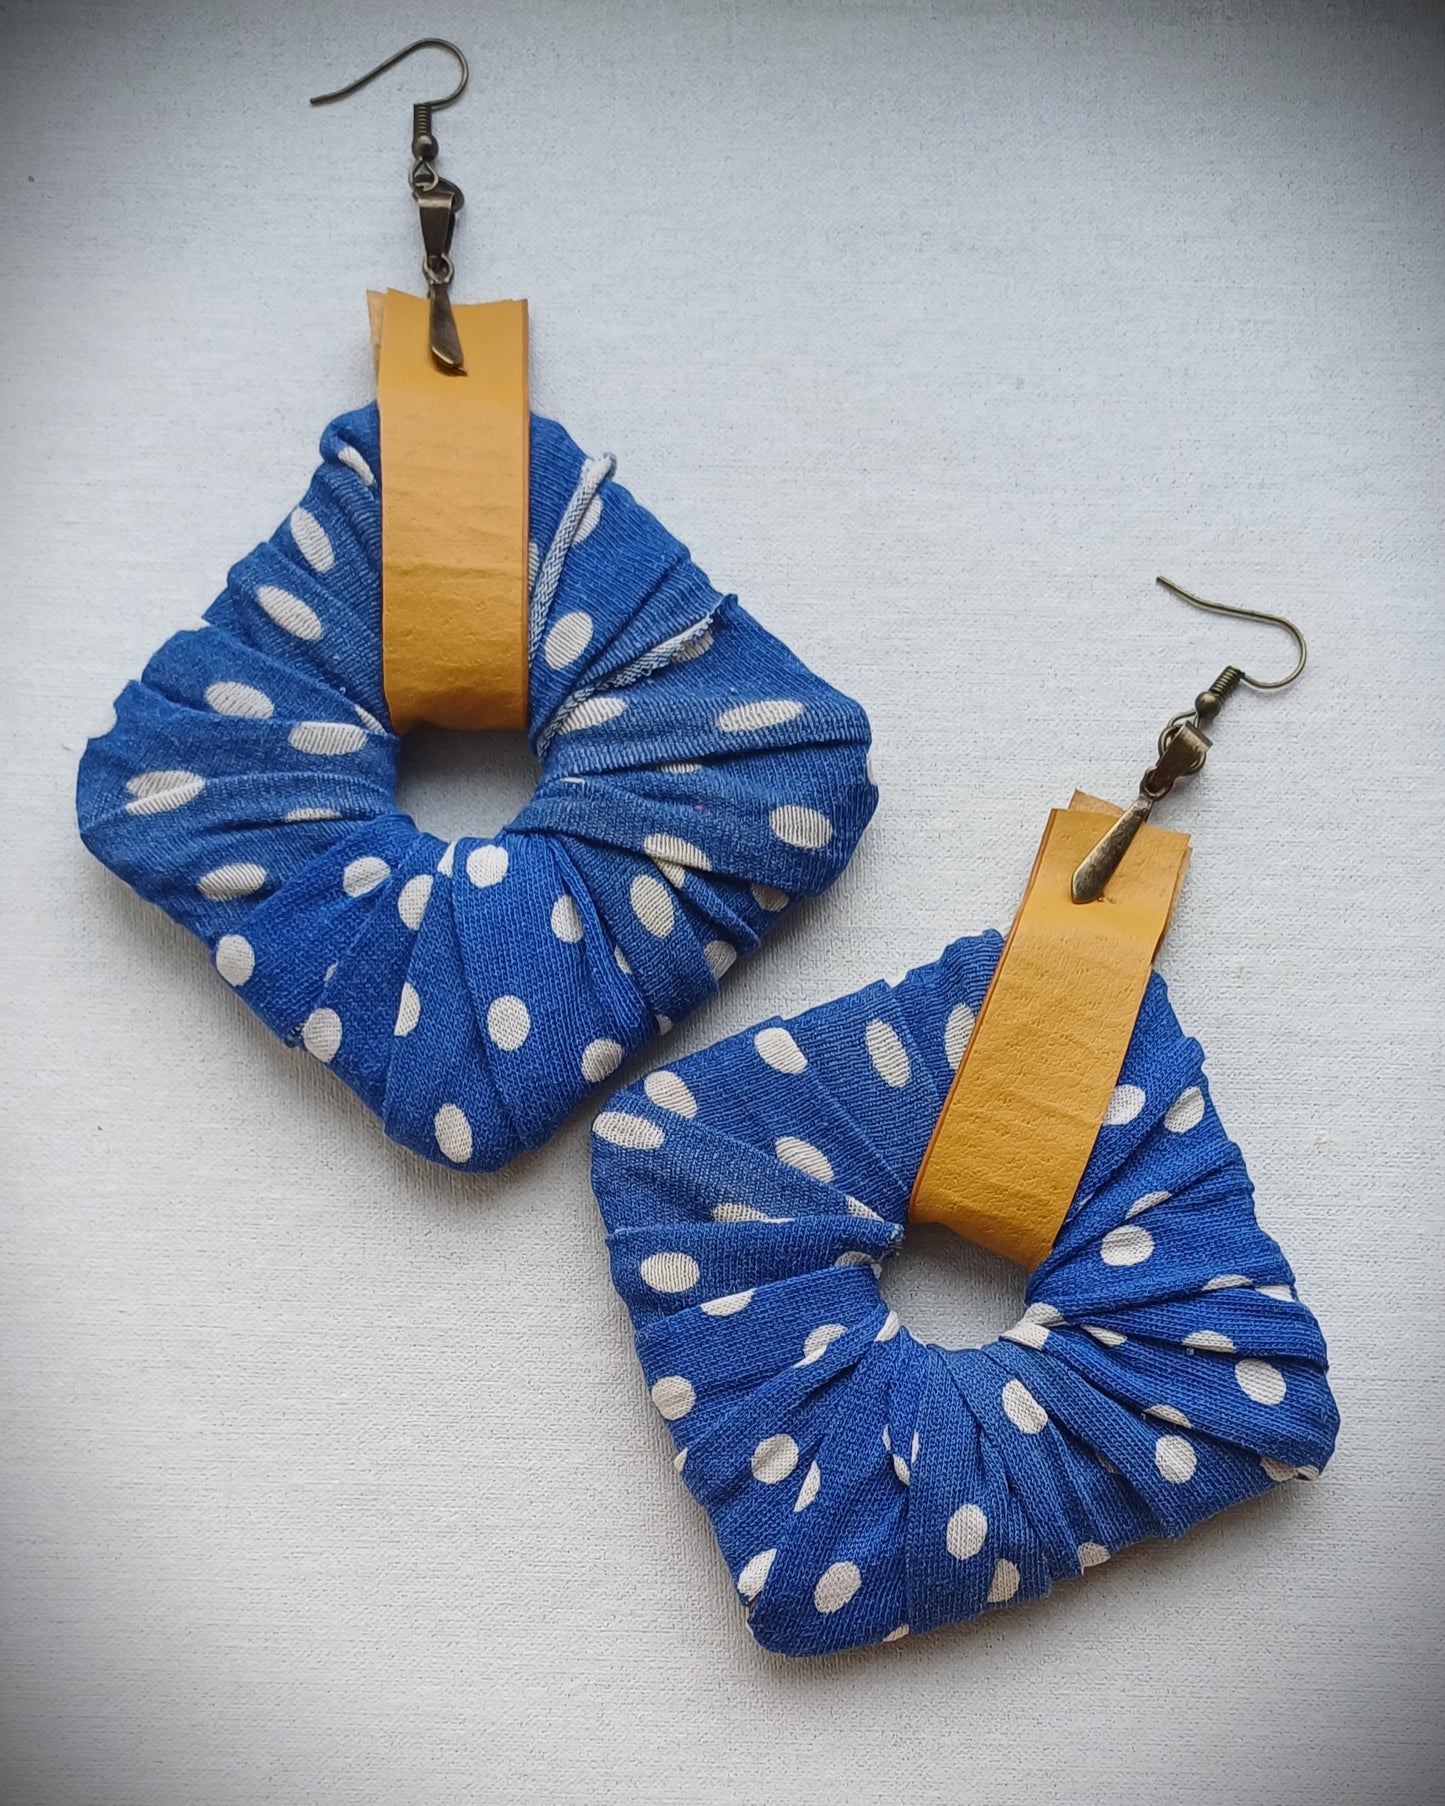 Blue Polka Dots and Yellow Ecofriendly Earrings ReviveWeave Jumbo Squares Upcycled Jewelry